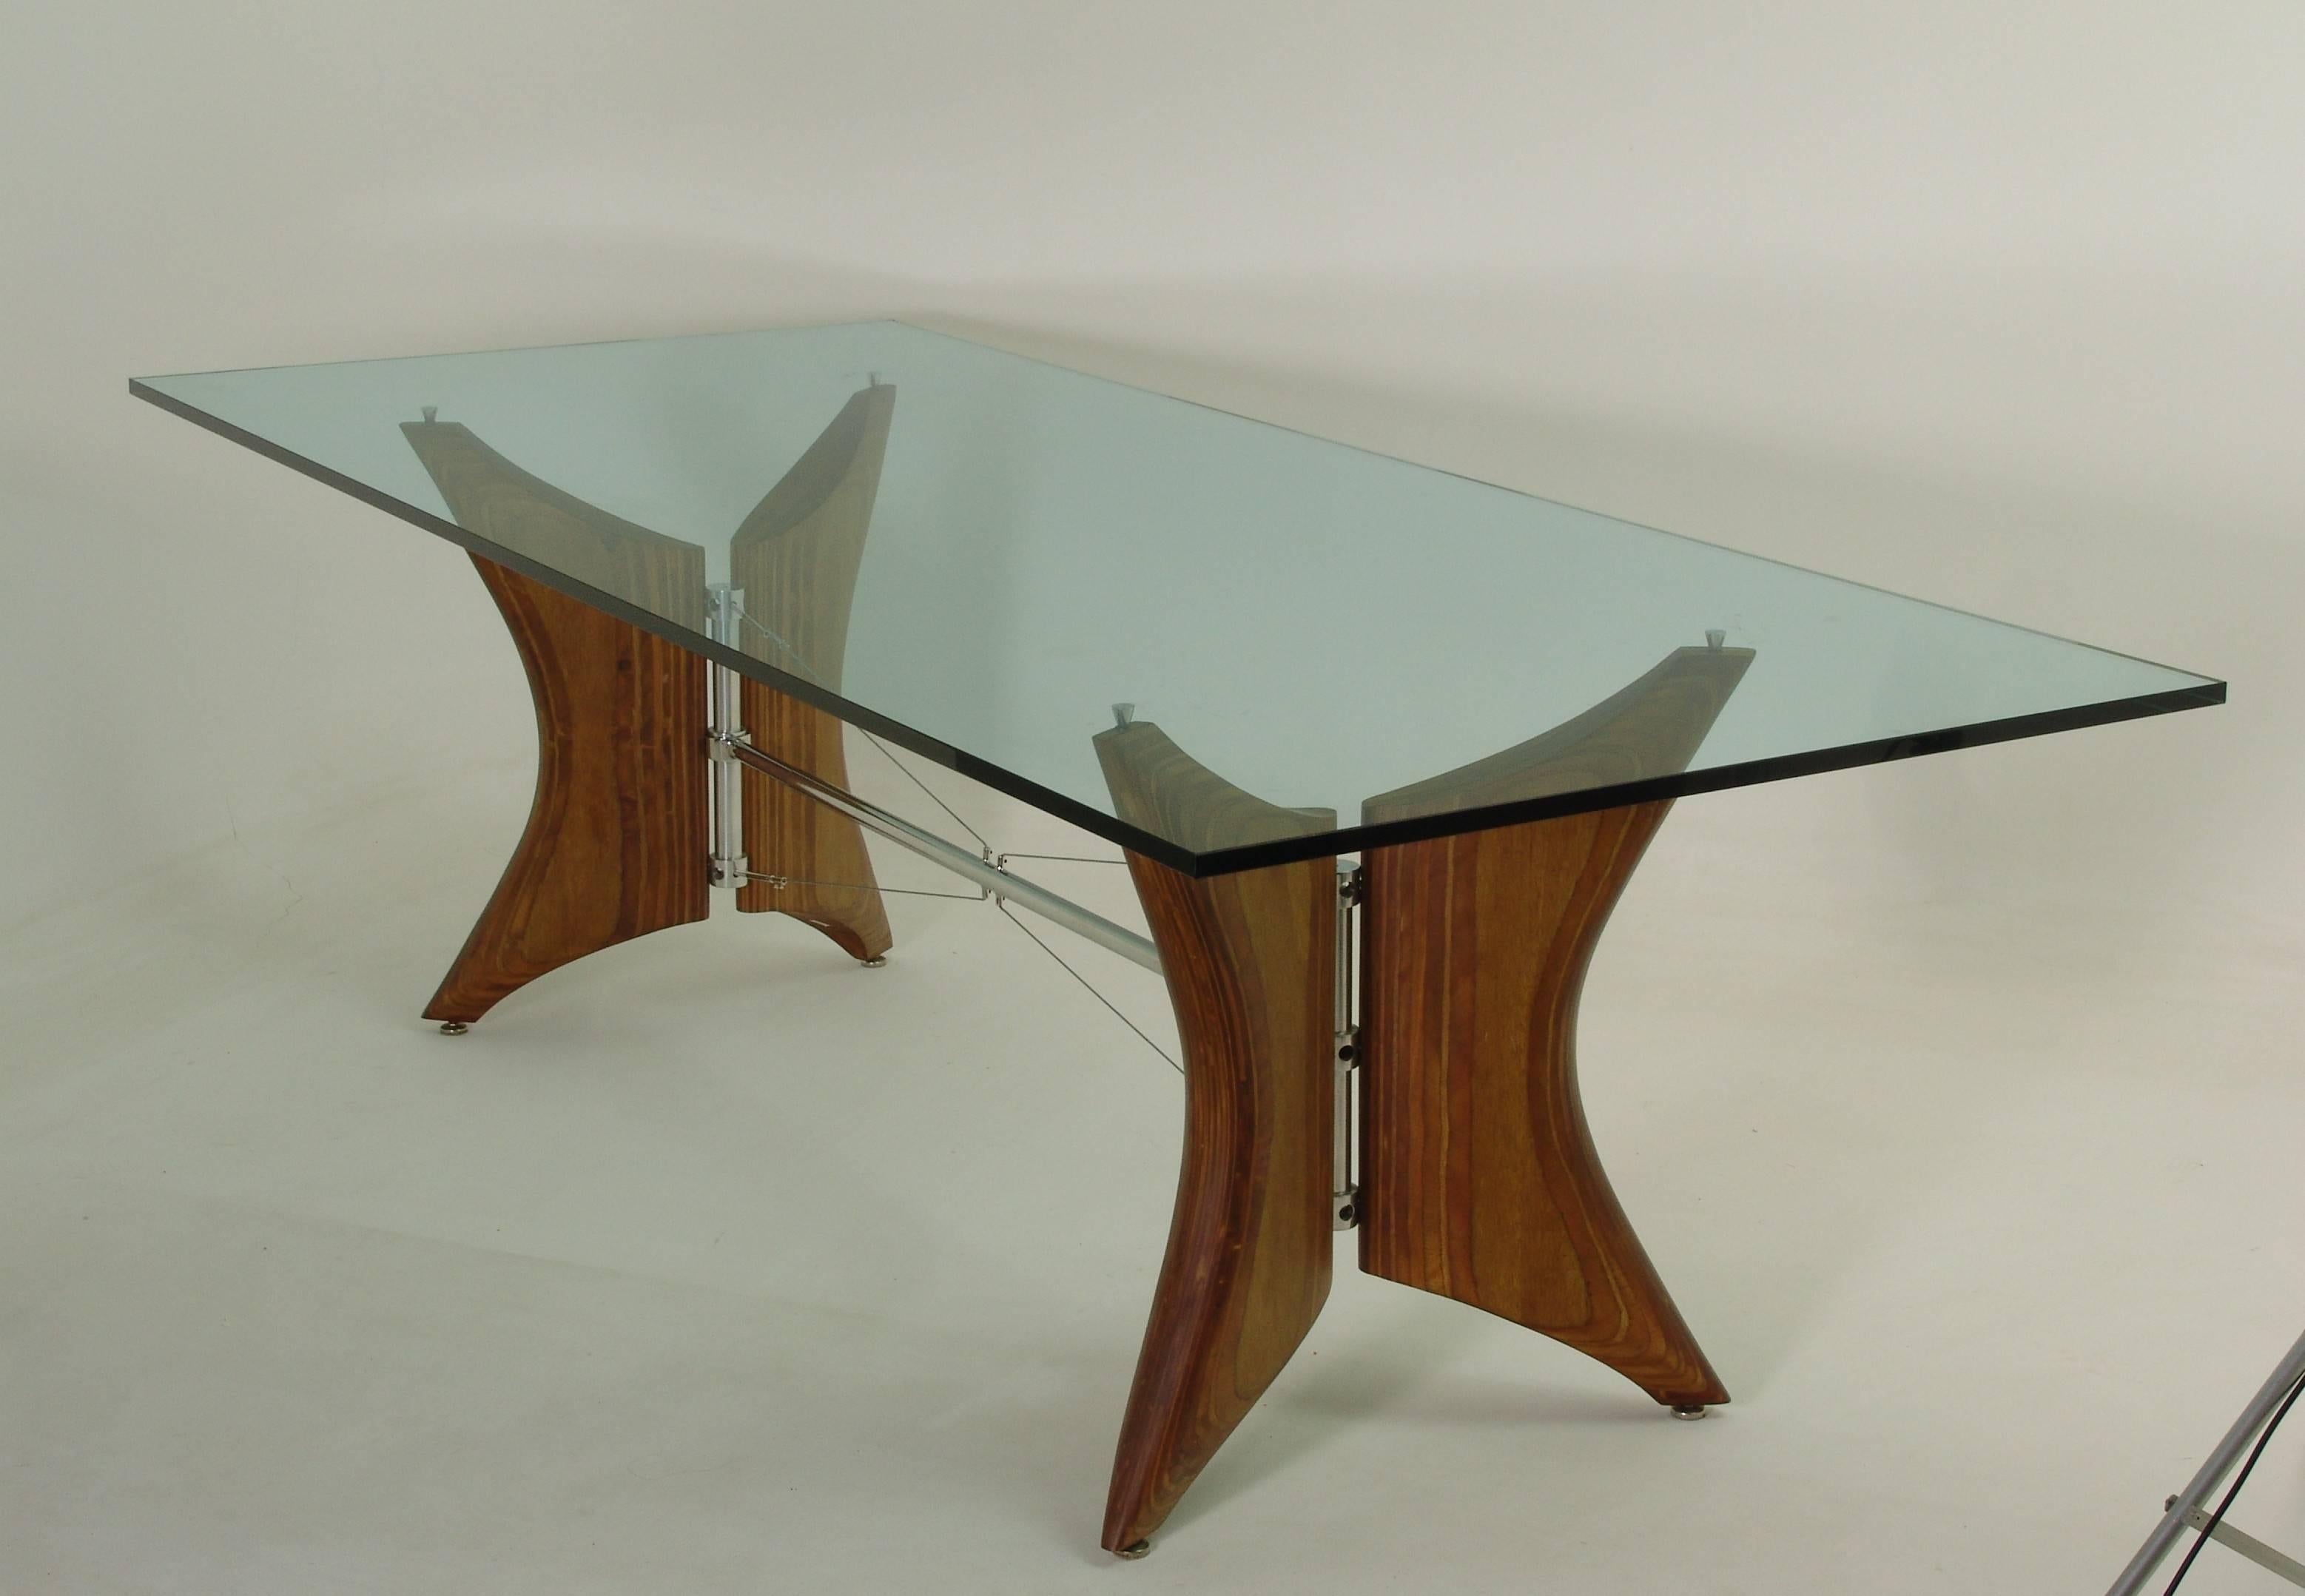 Table base with demountable leg, adjustable on the rectangular version. Made of plywood.